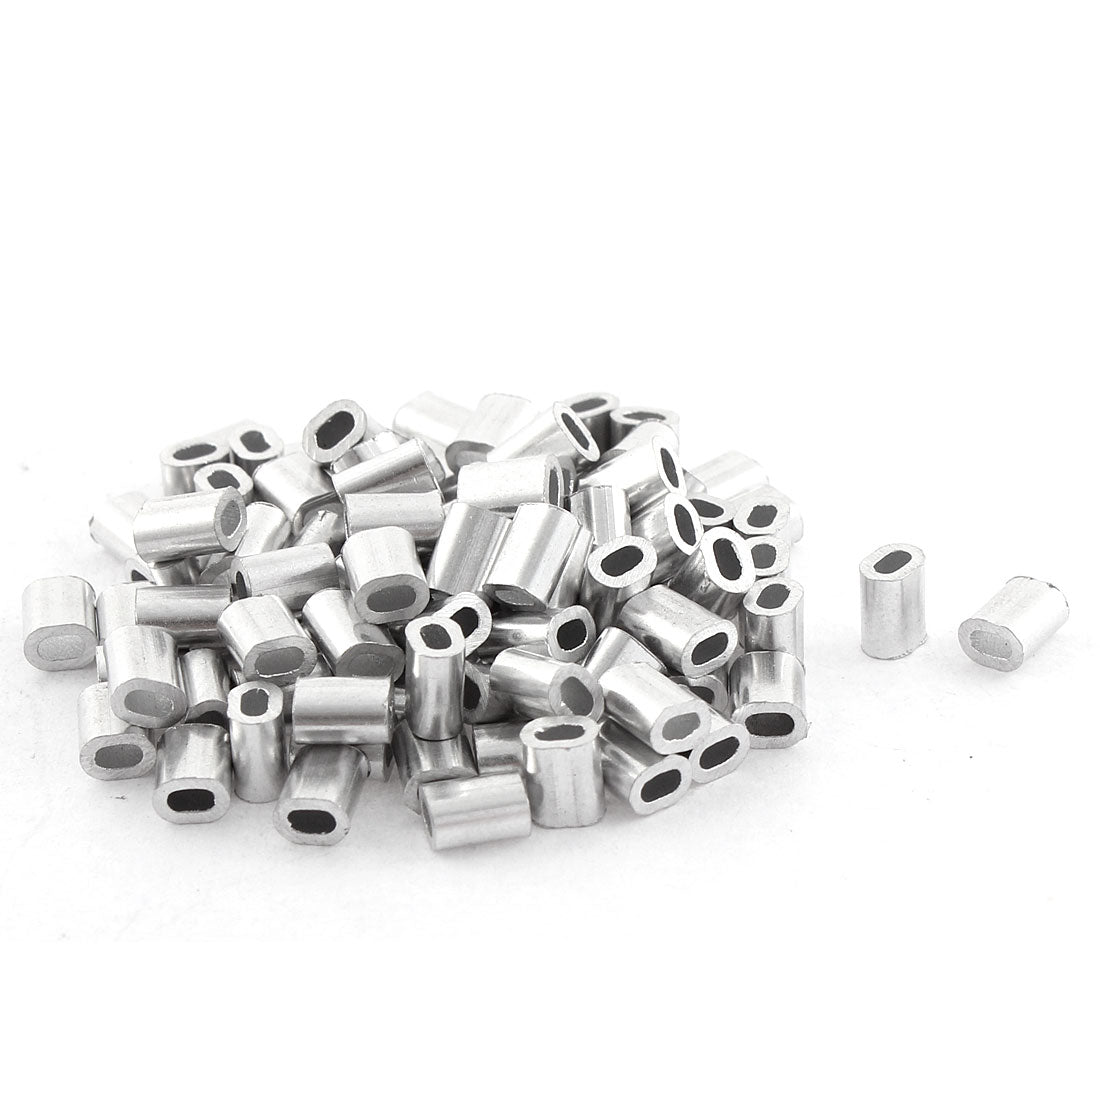 uxcell Uxcell 100pcs Oval Aluminum Sleeves Clamps for 1mm Wire Rope Swage Clip